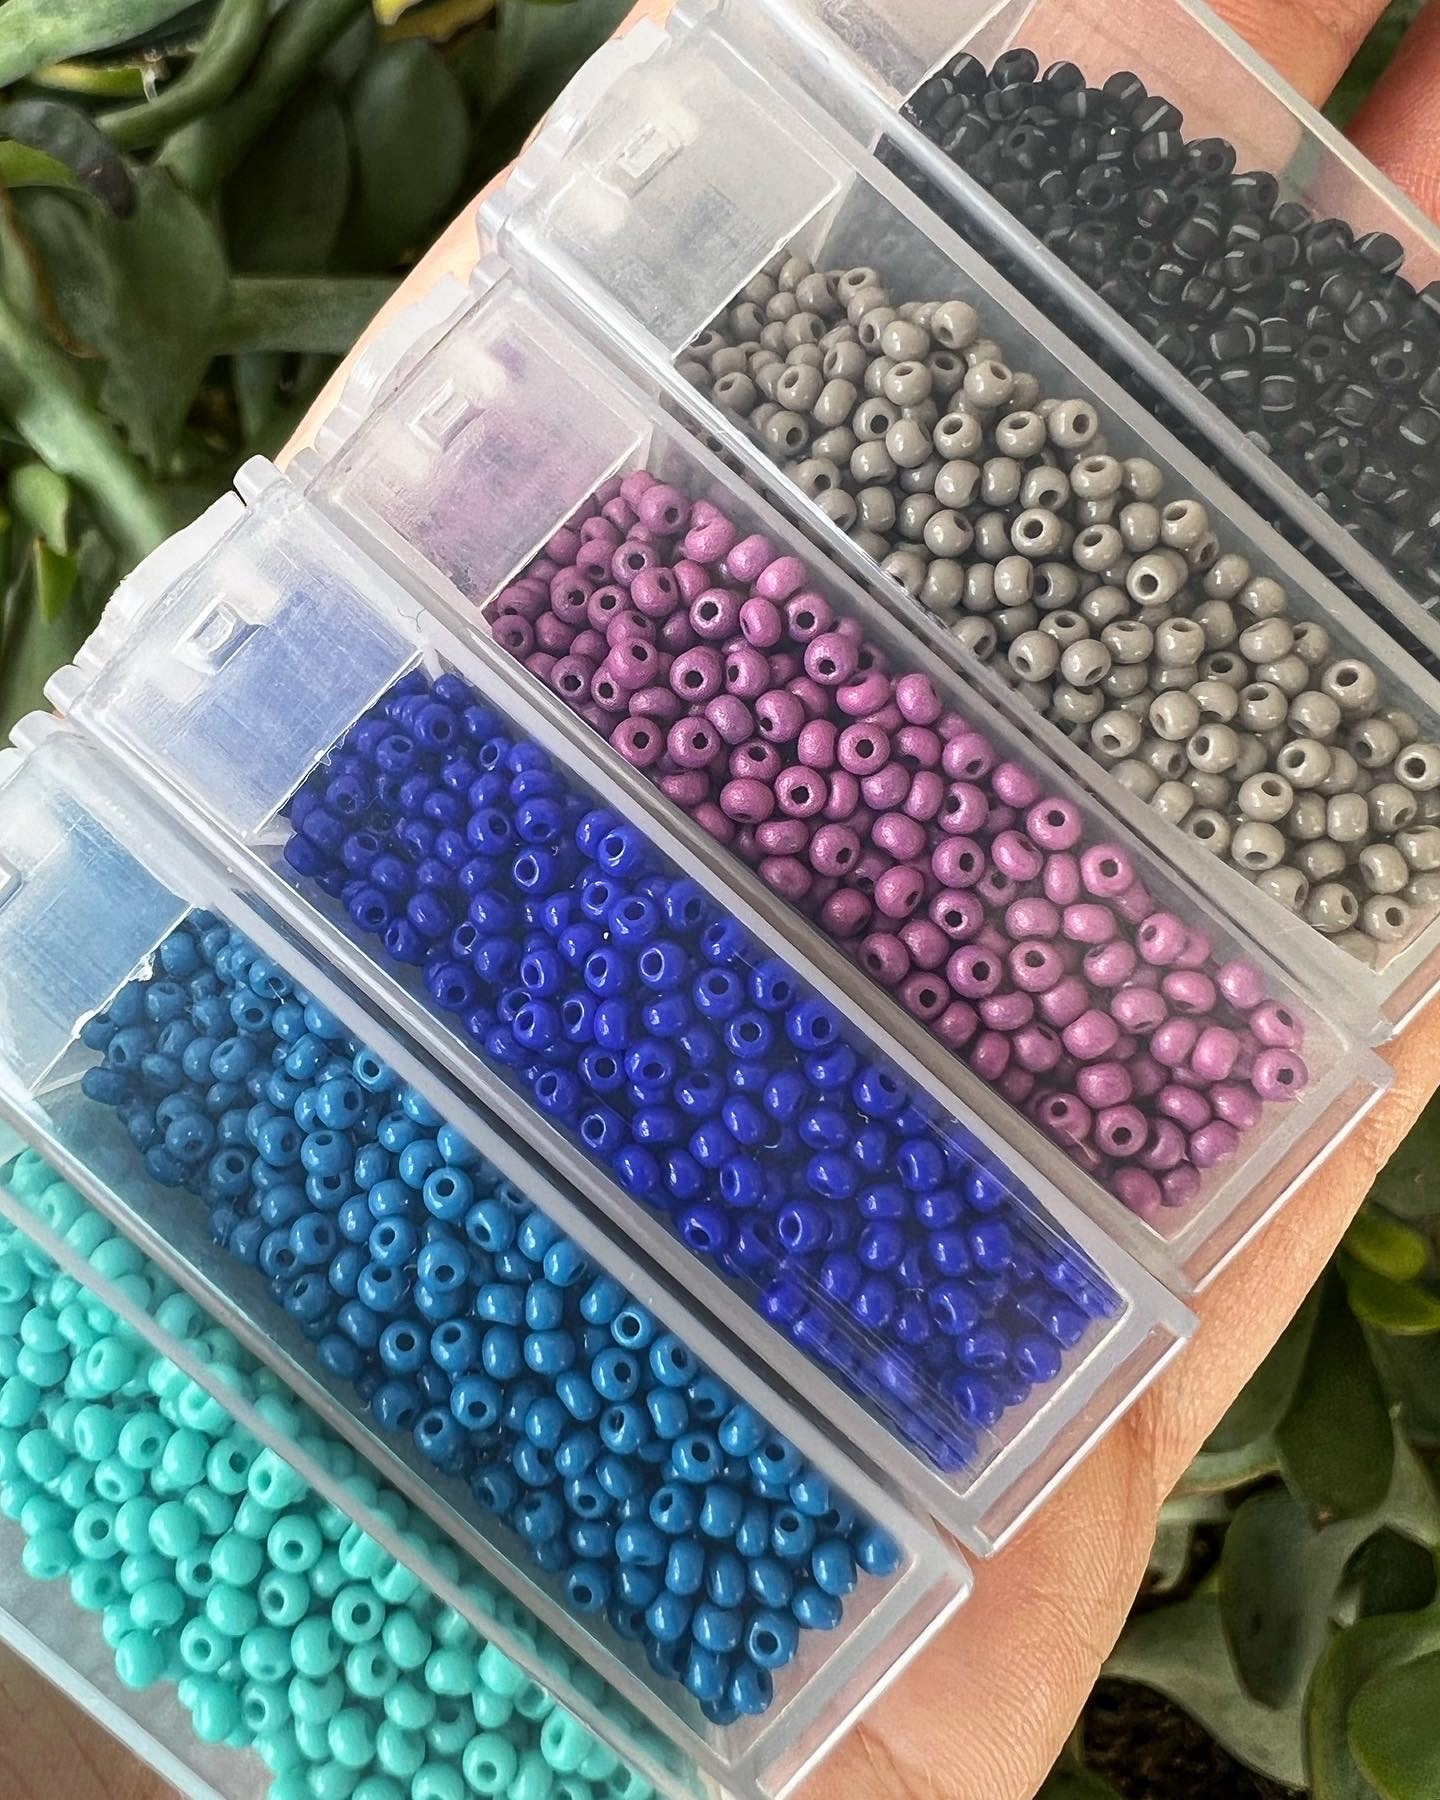 Bead Brilliantly Jewelry and Bead Sets - Gray Weave Beading Kit